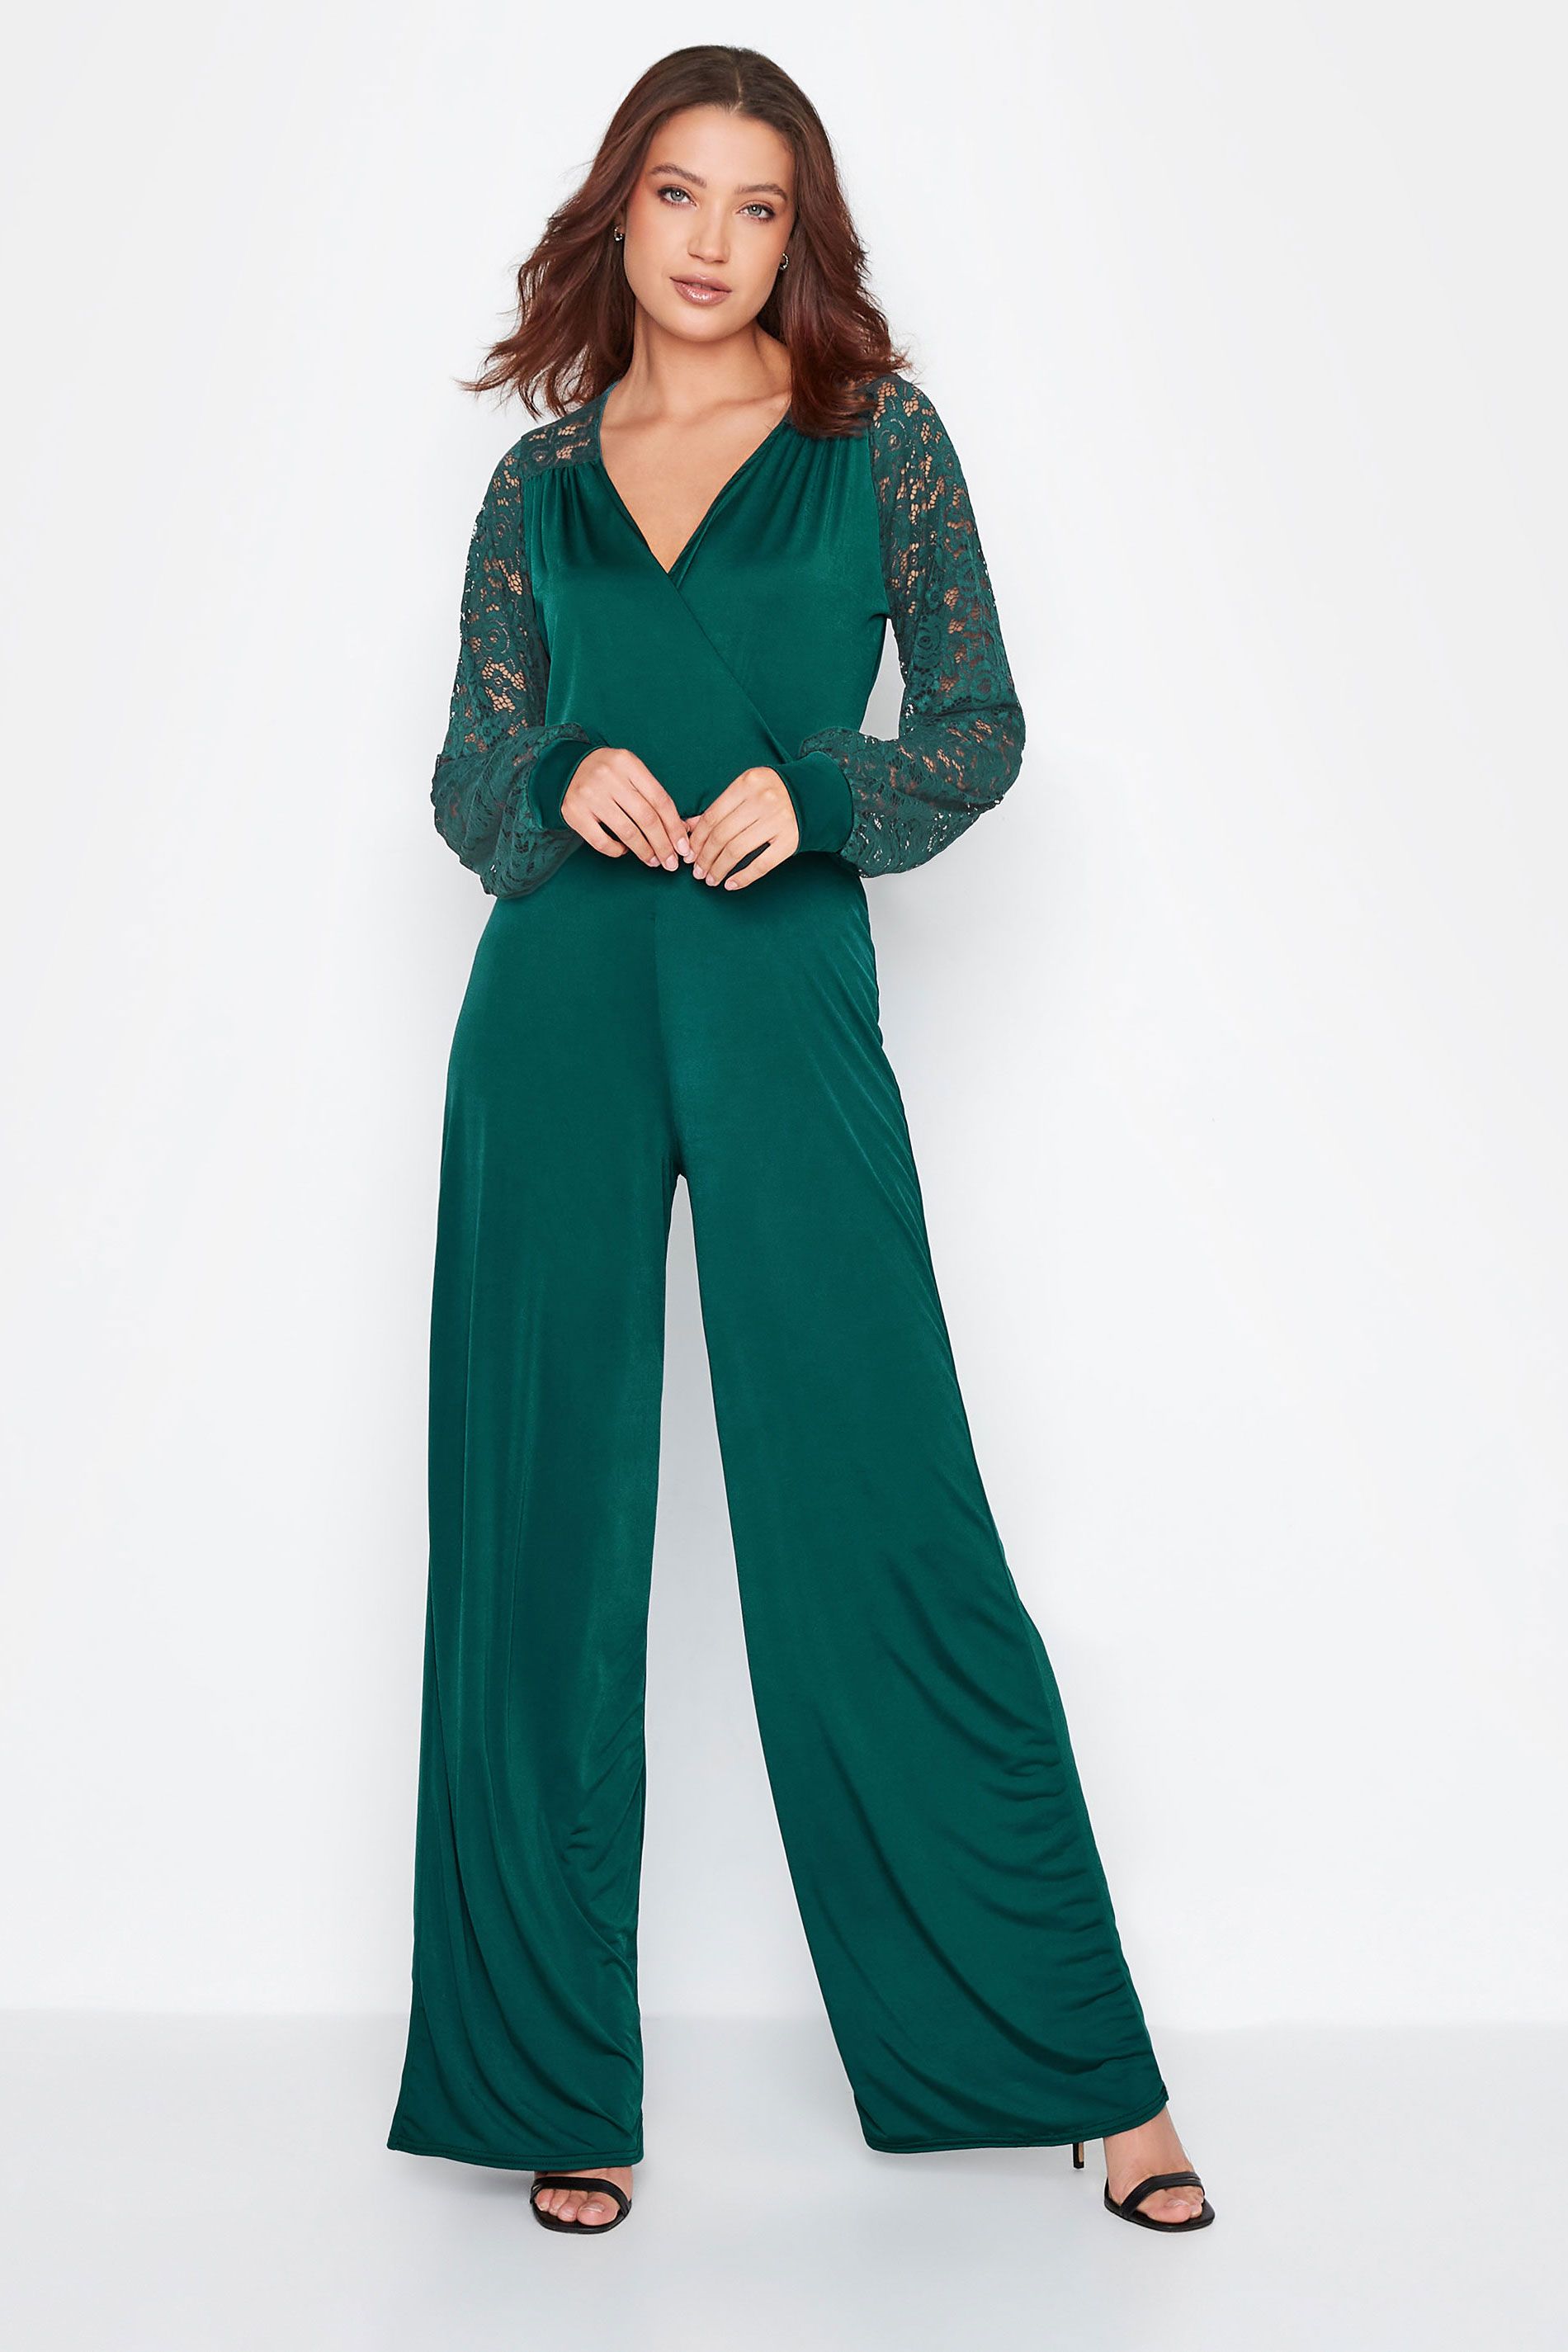 LTS Tall Forest Green Lace Back Stretch Jumpsuit | Long Tall Sally